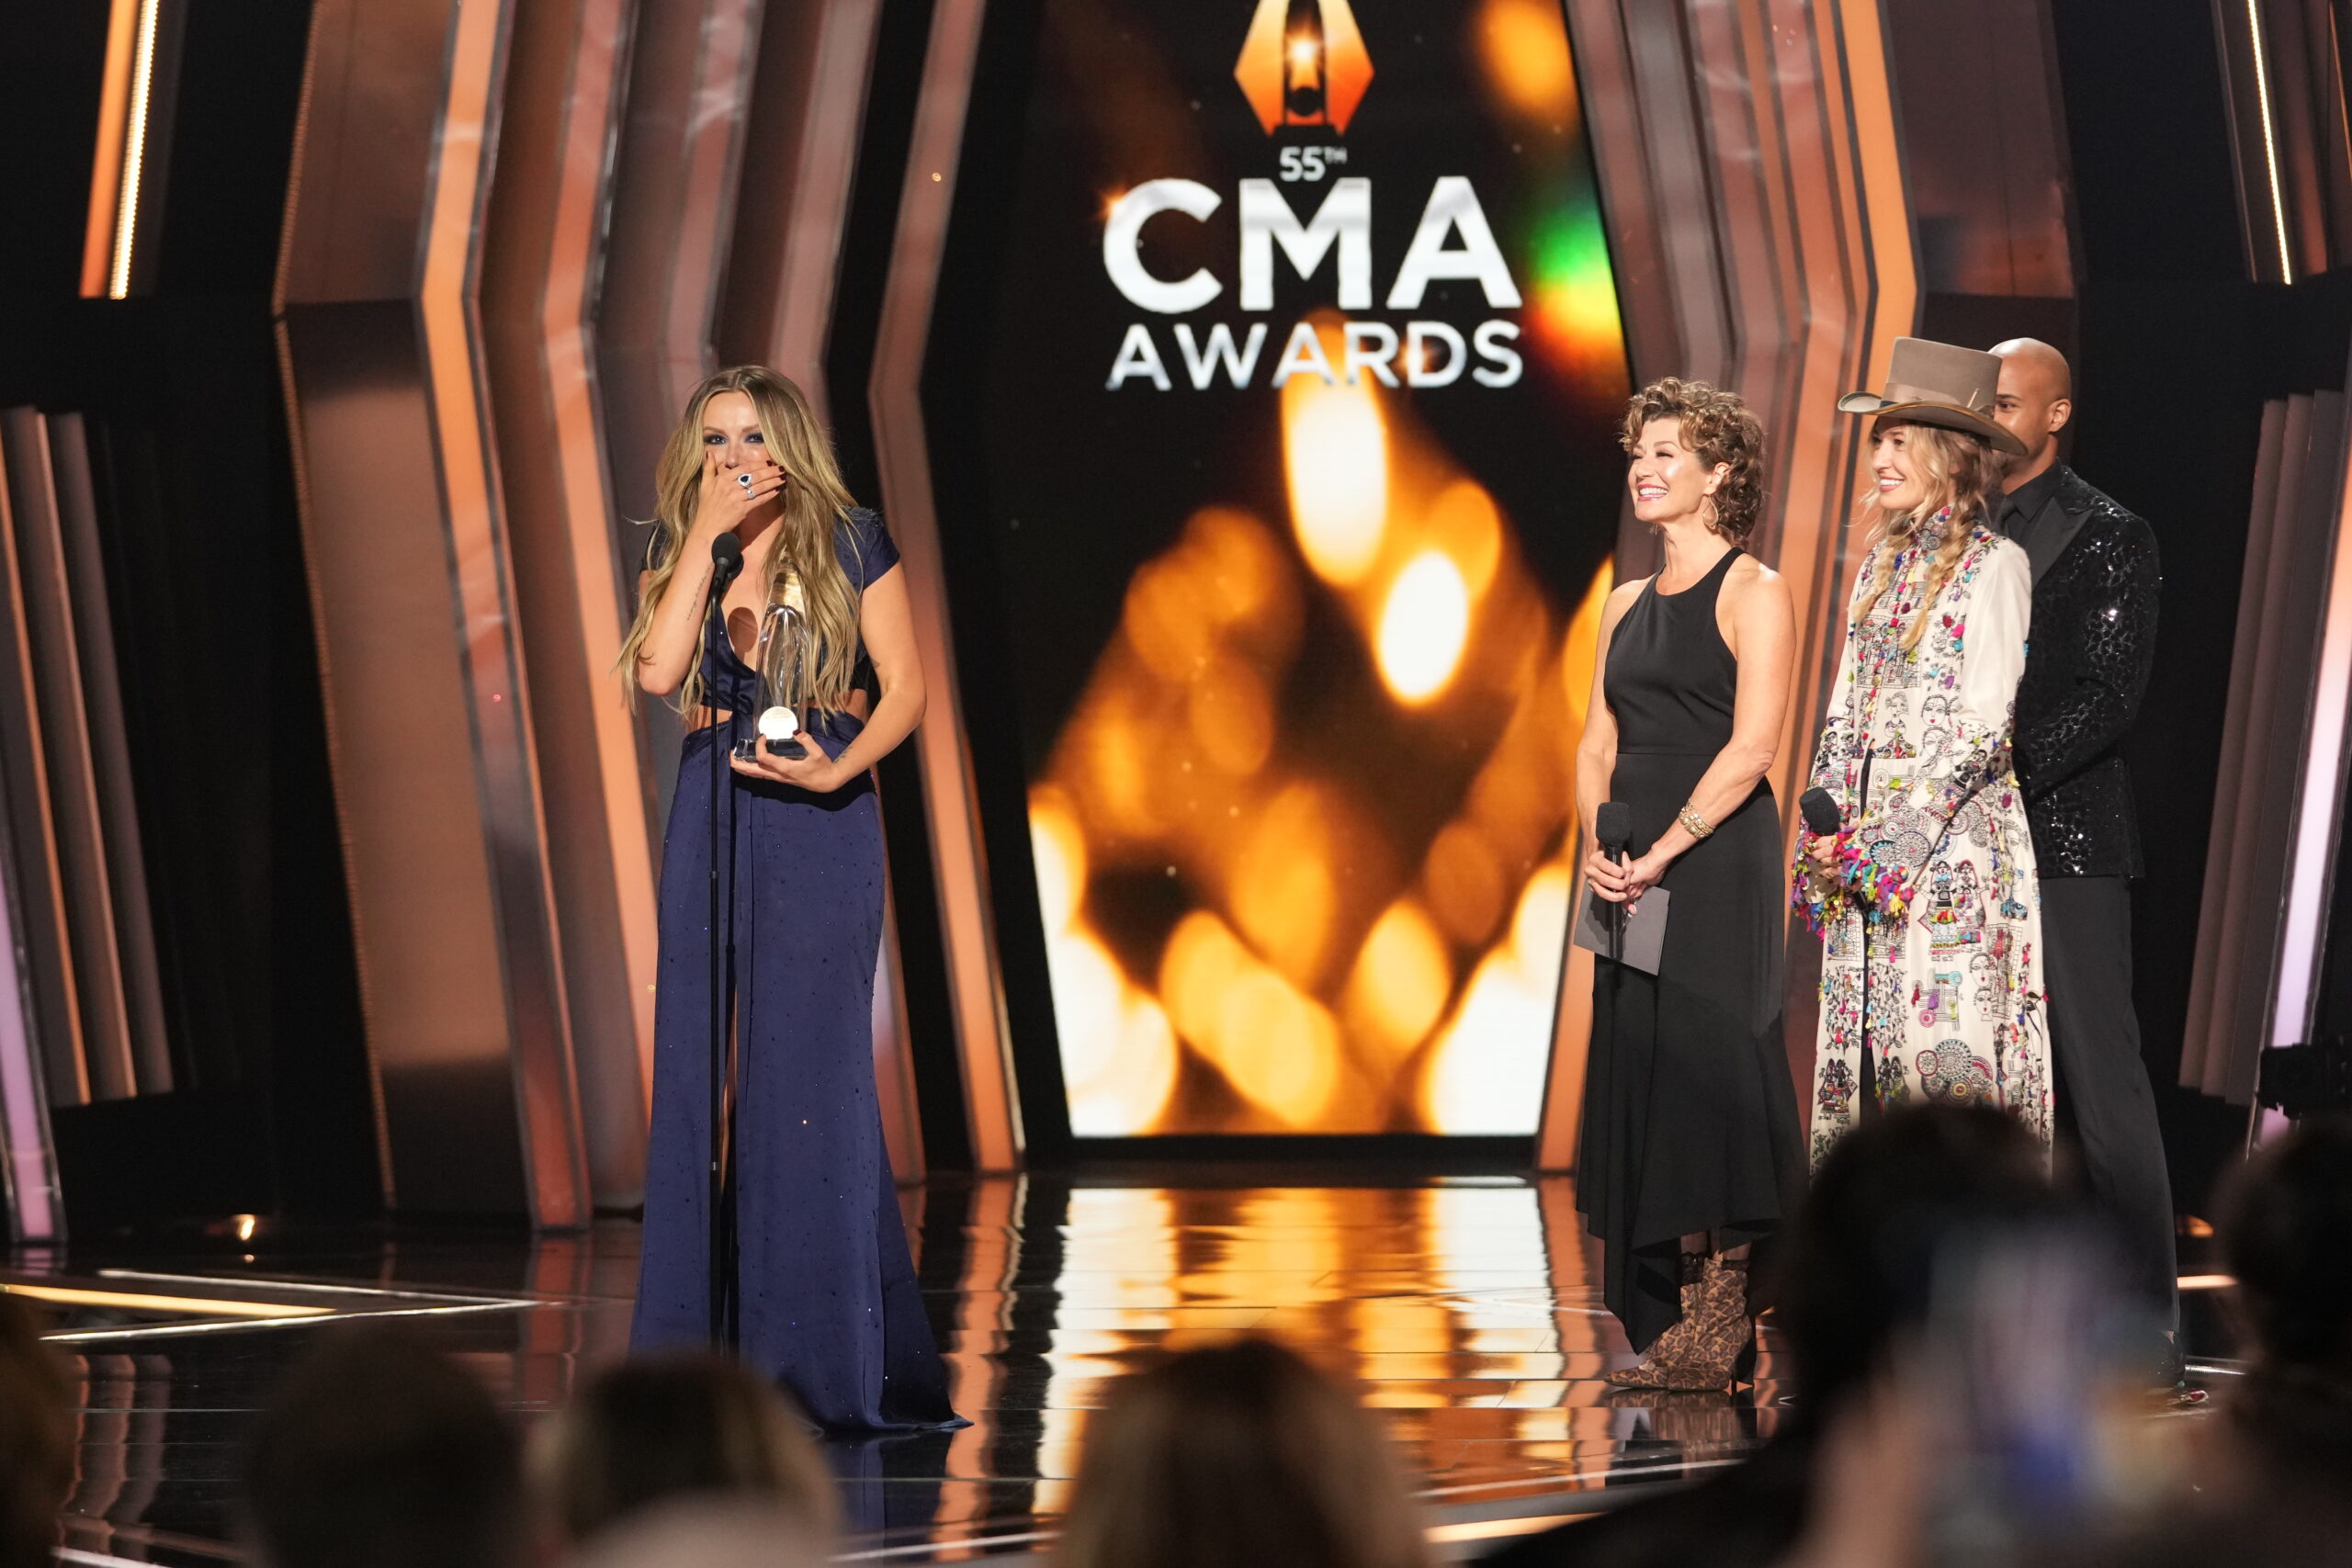 Carly Pearce Reflects on Win for “Female Vocalist of the Year” at 2021 CMA Awards (Exclusive)